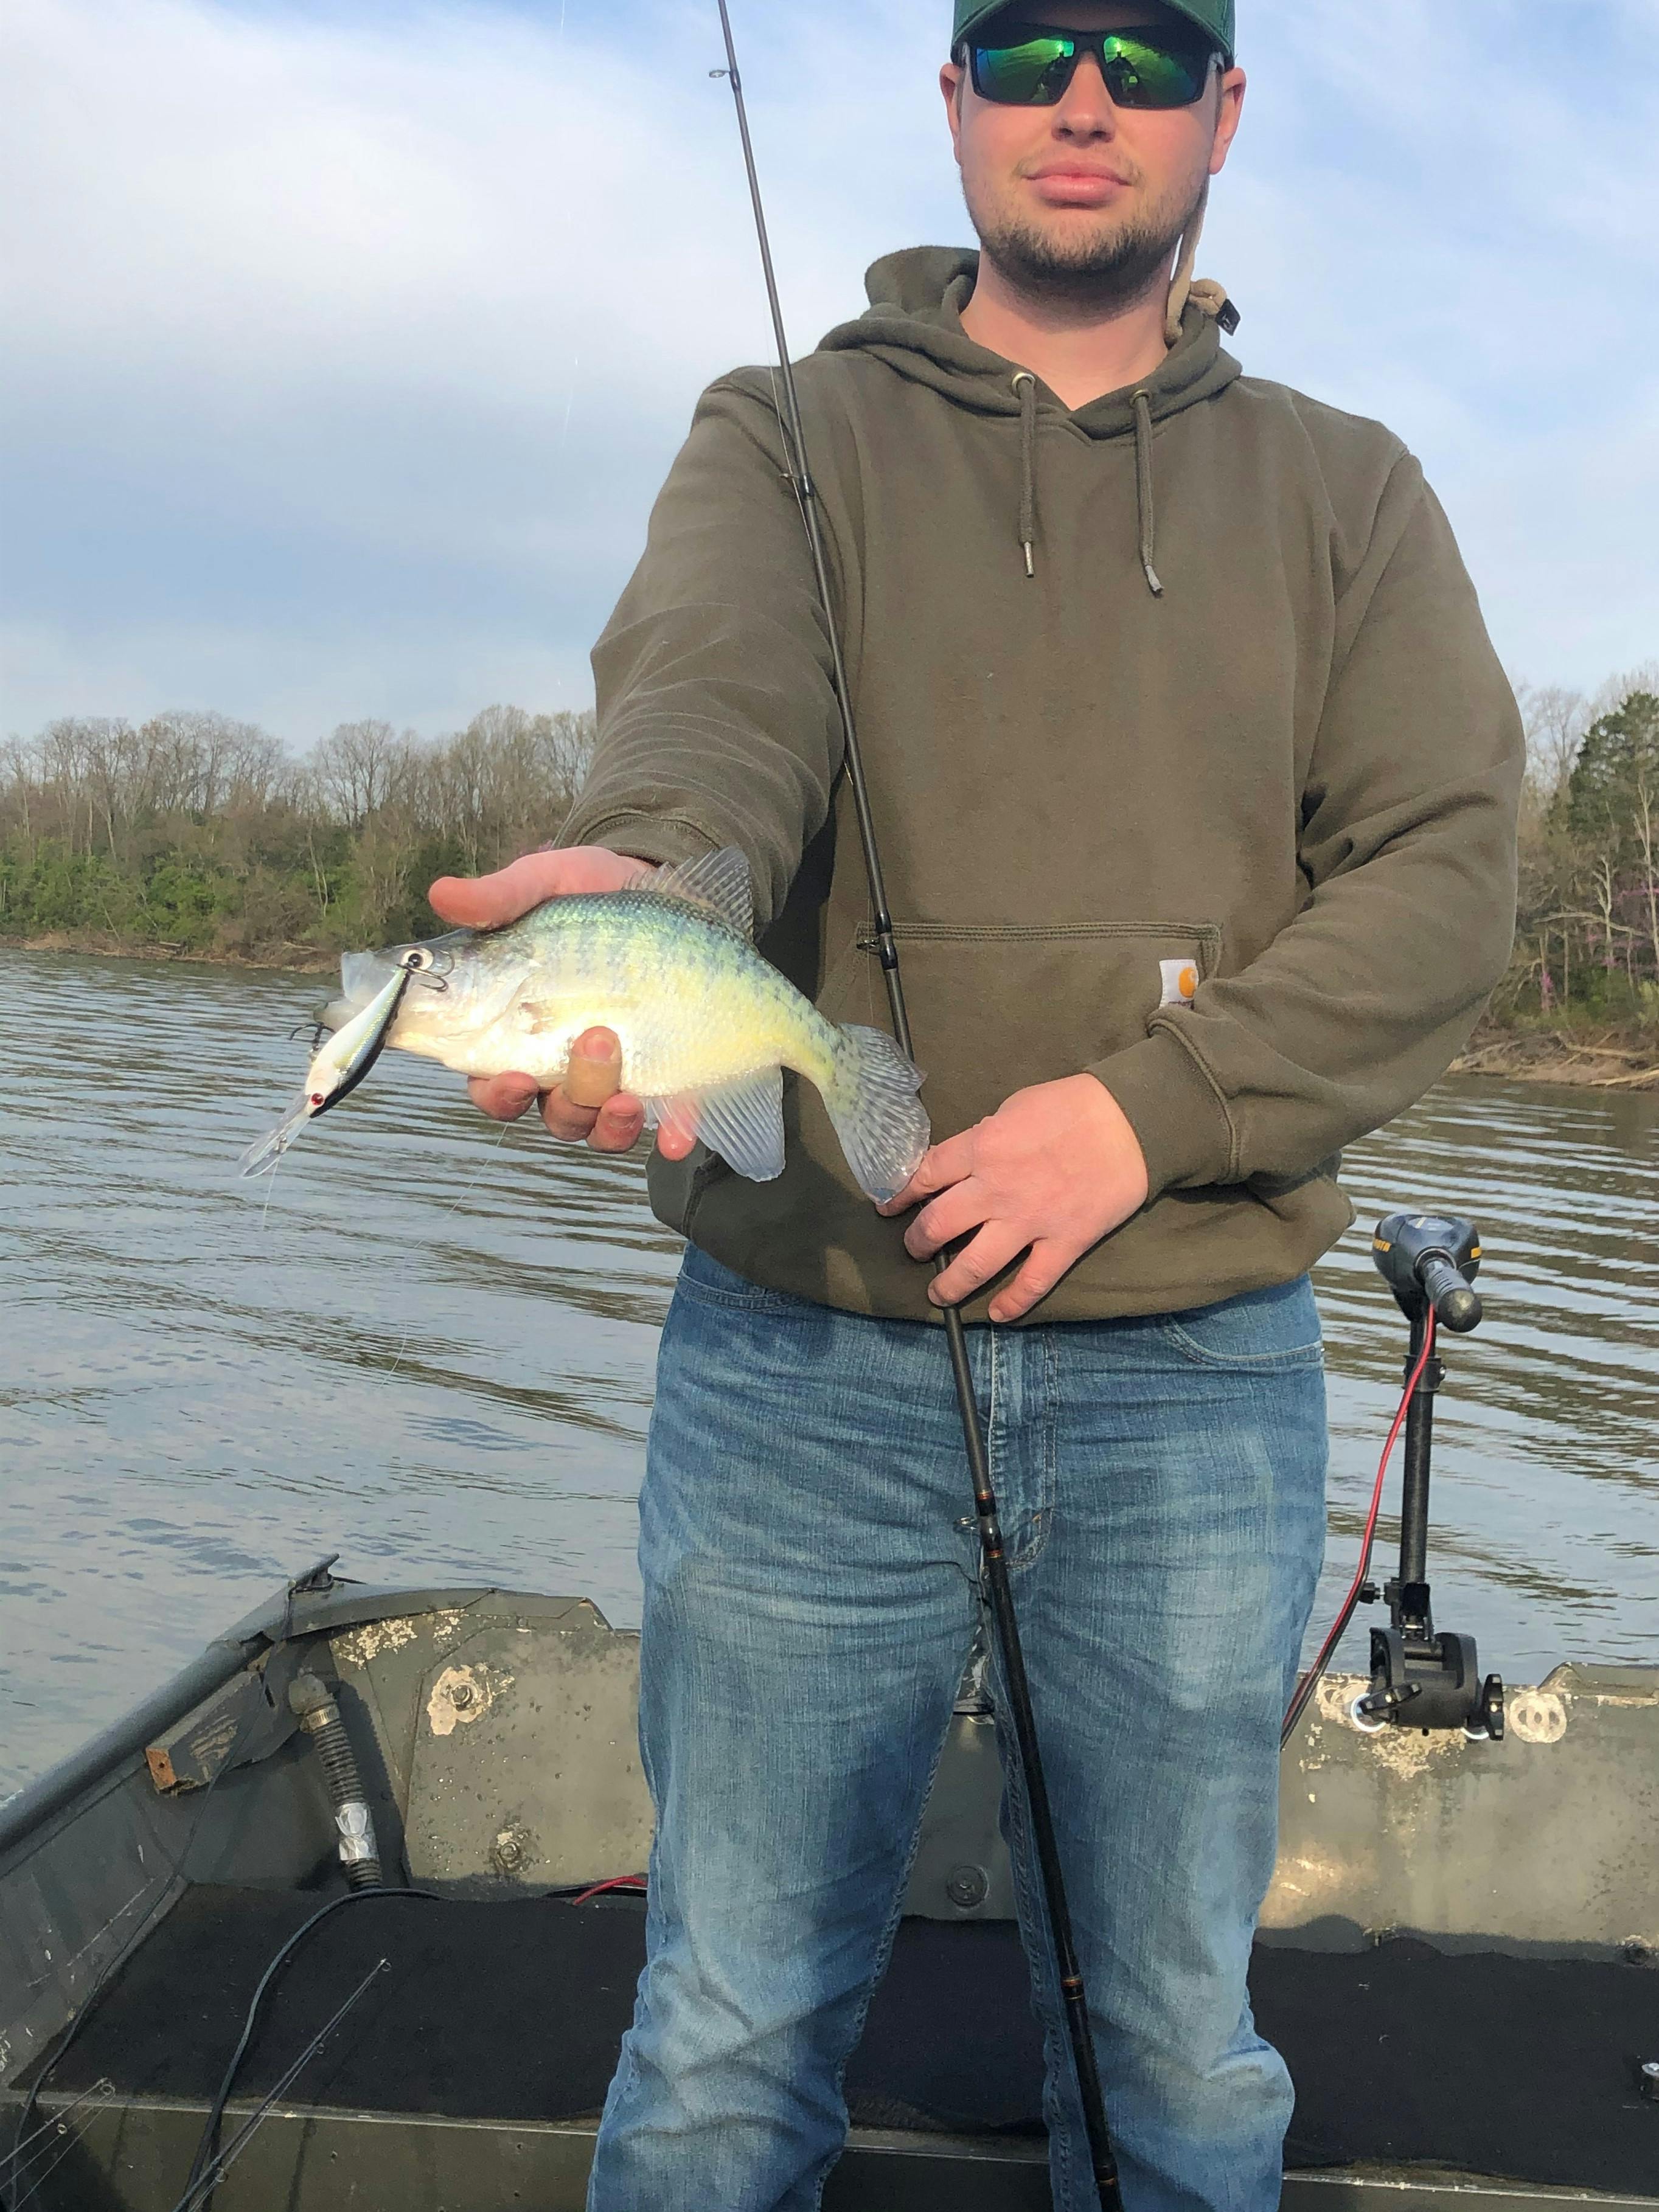 The author stands on a boat and holds out a crappie that has a crankbait in its lip.